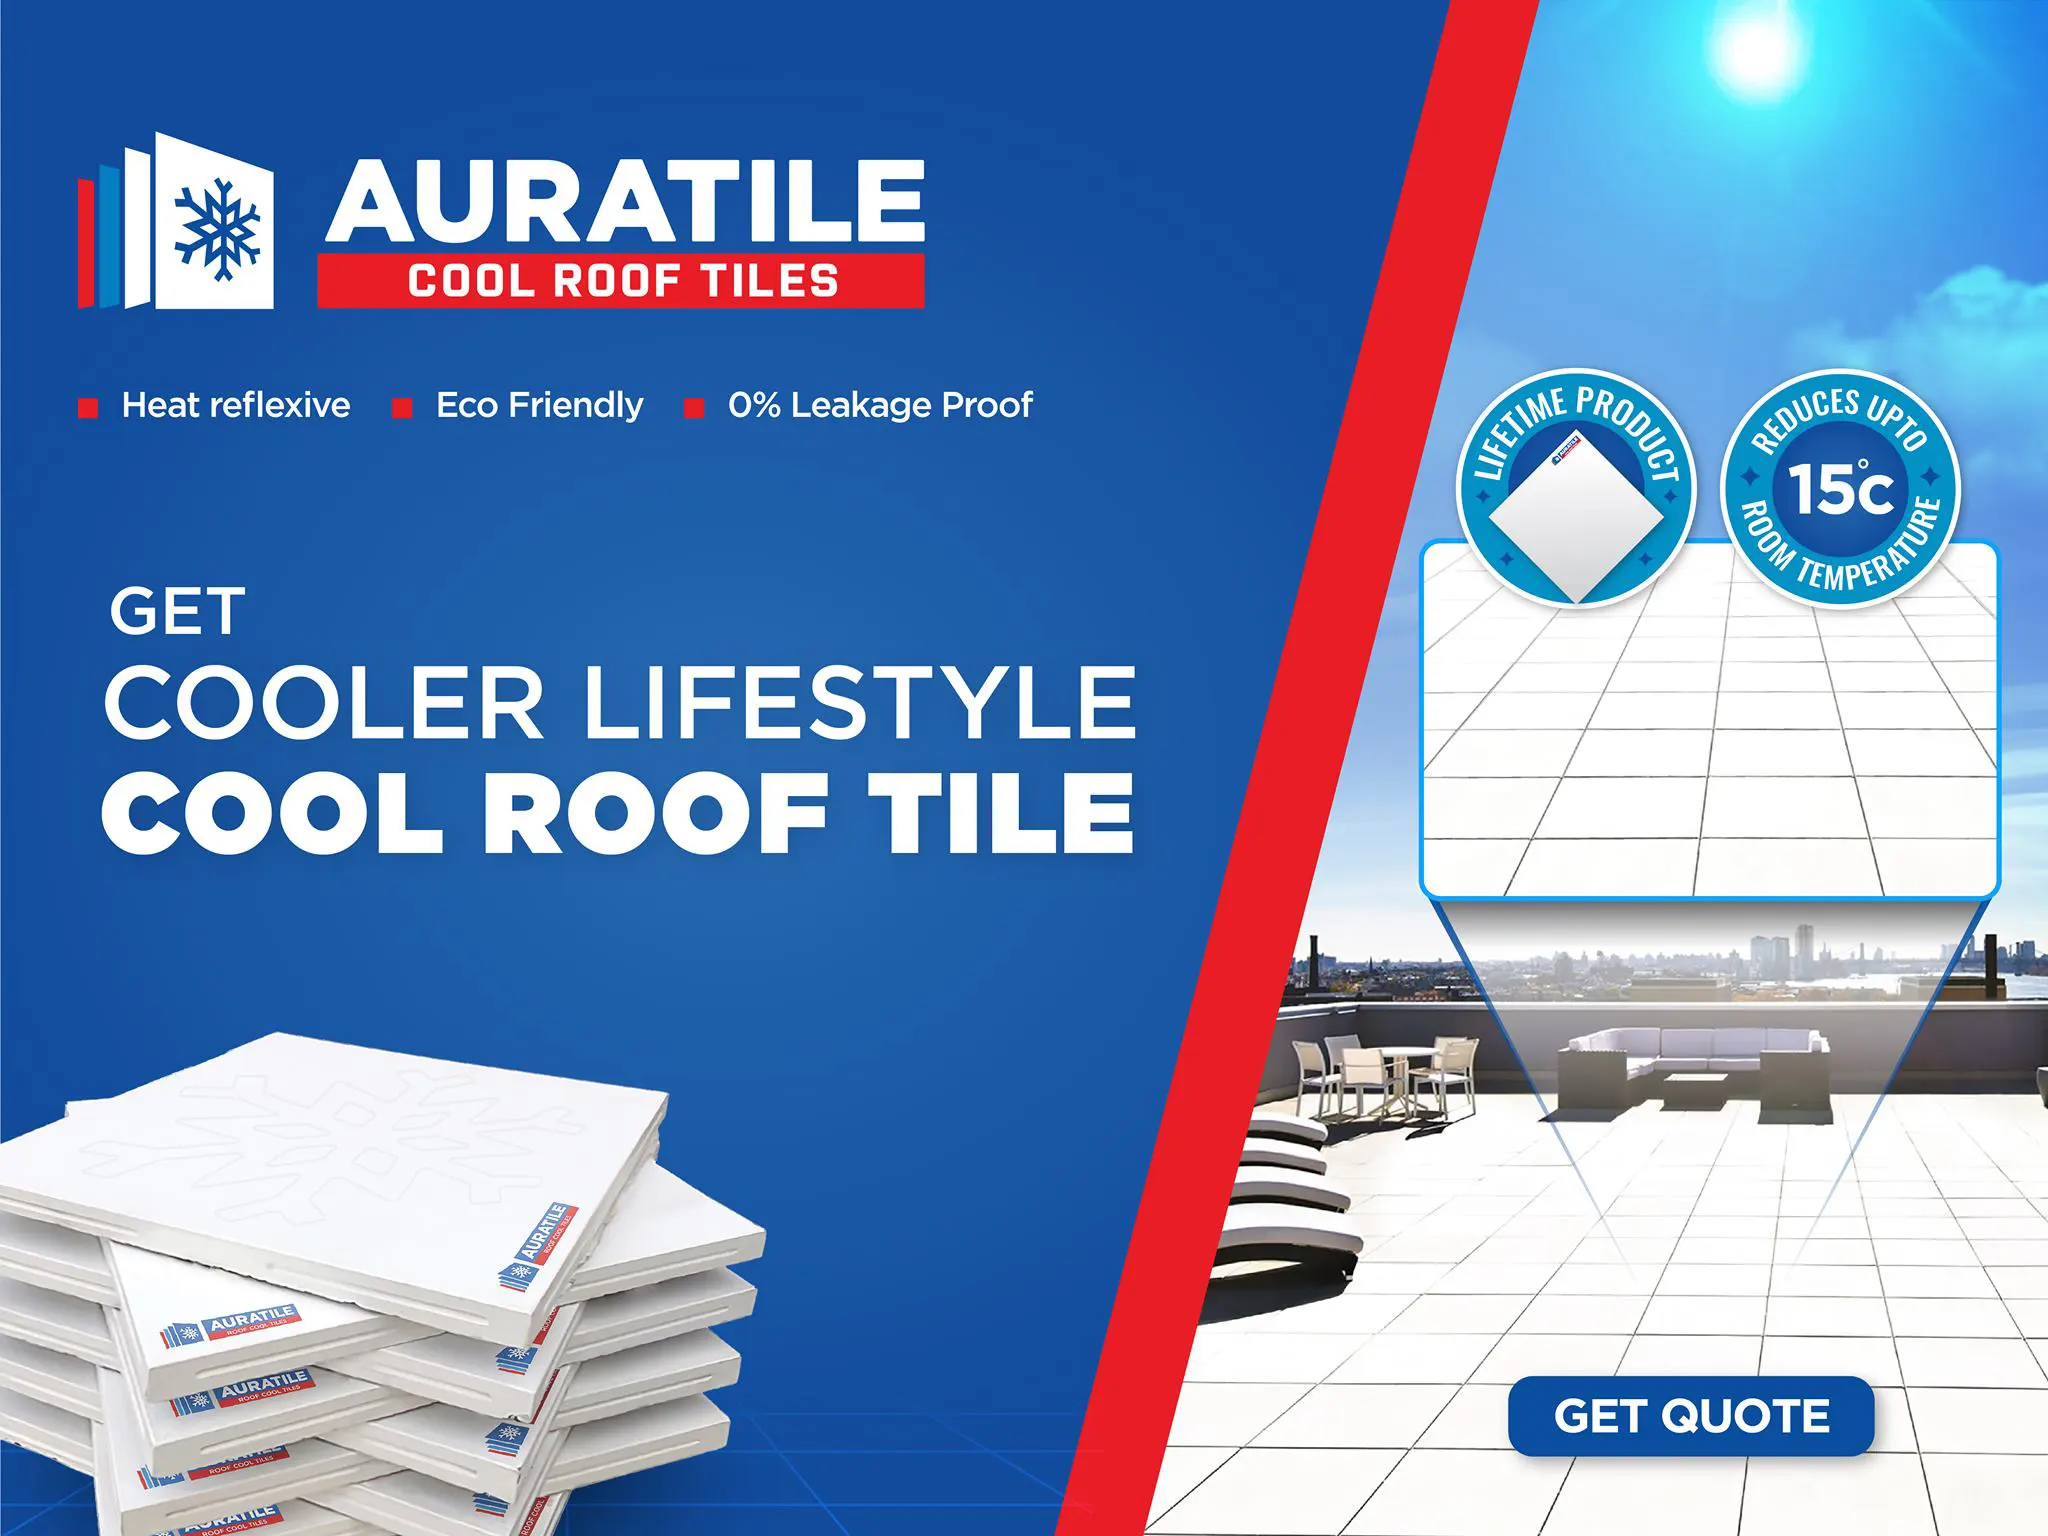 Benefits of cool roof tiles